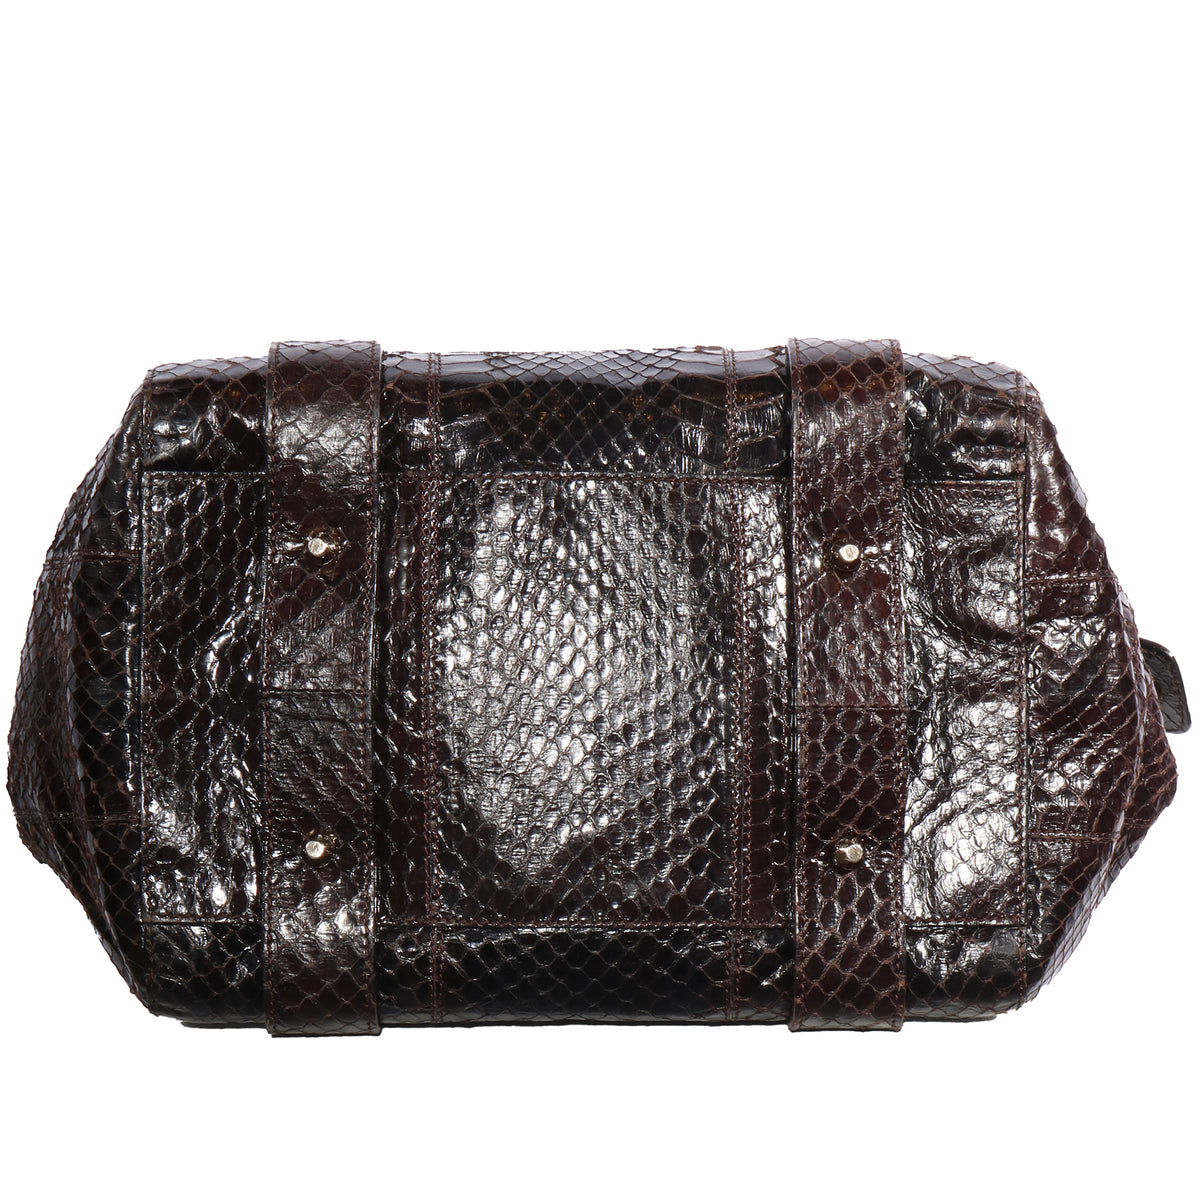 VTG DOLCE AND GABBANA EMBOSSED LEATHER TOP HANDLE BAG